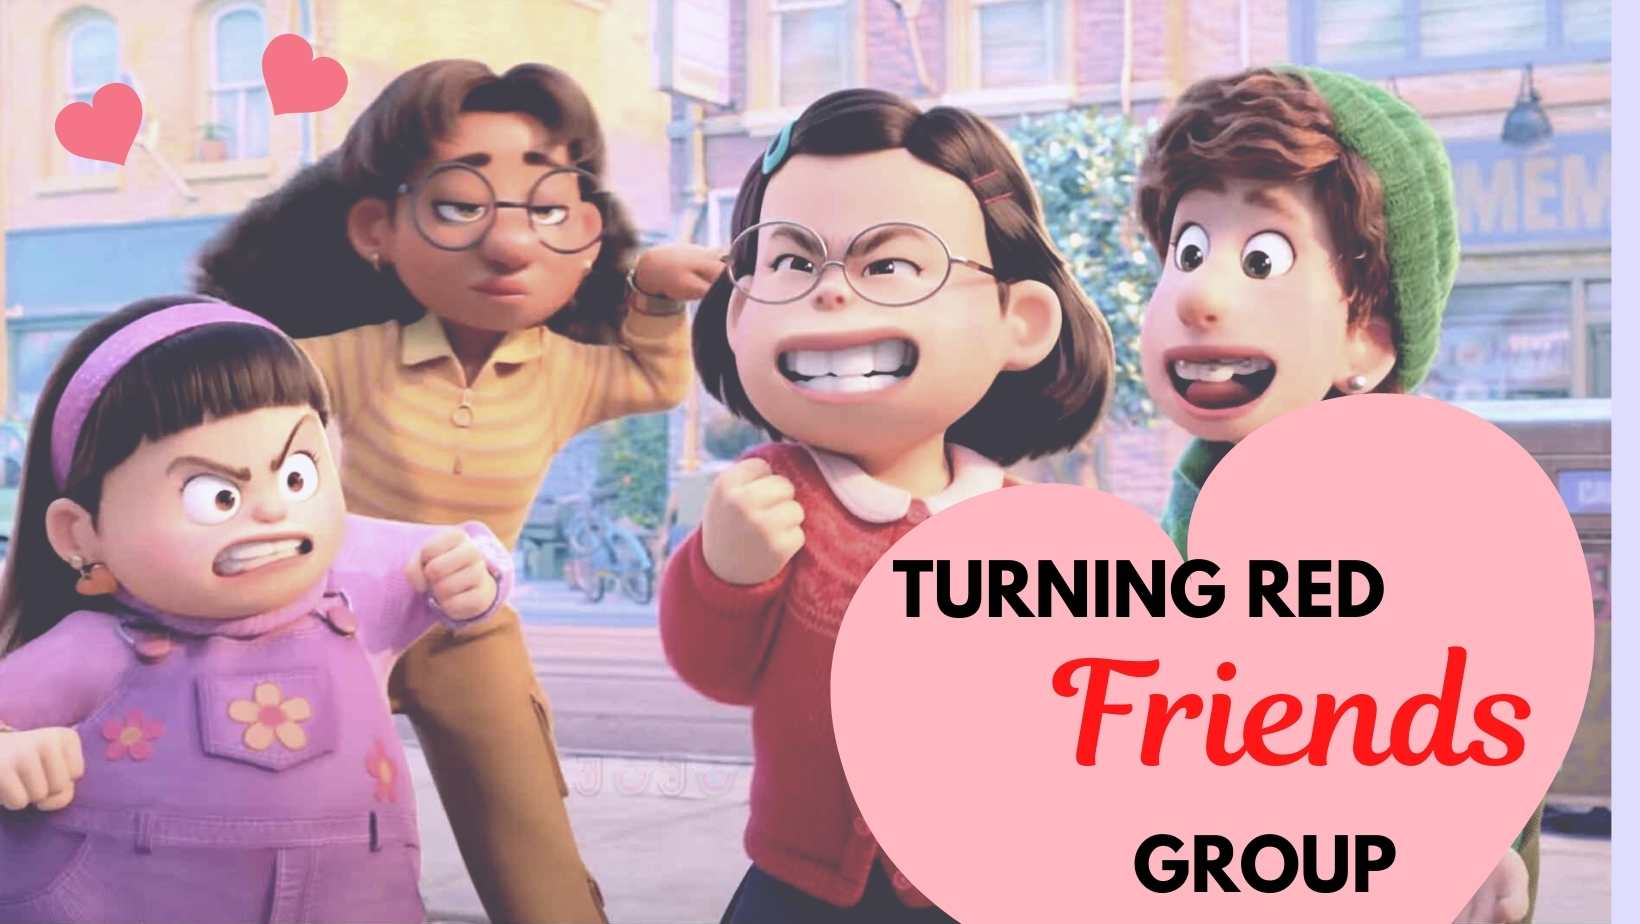 Turning Red Friend Group. All the Turning Red Girls Group is here, Meet with the full school friends of the girl from Turning Red film 2022 Disney +